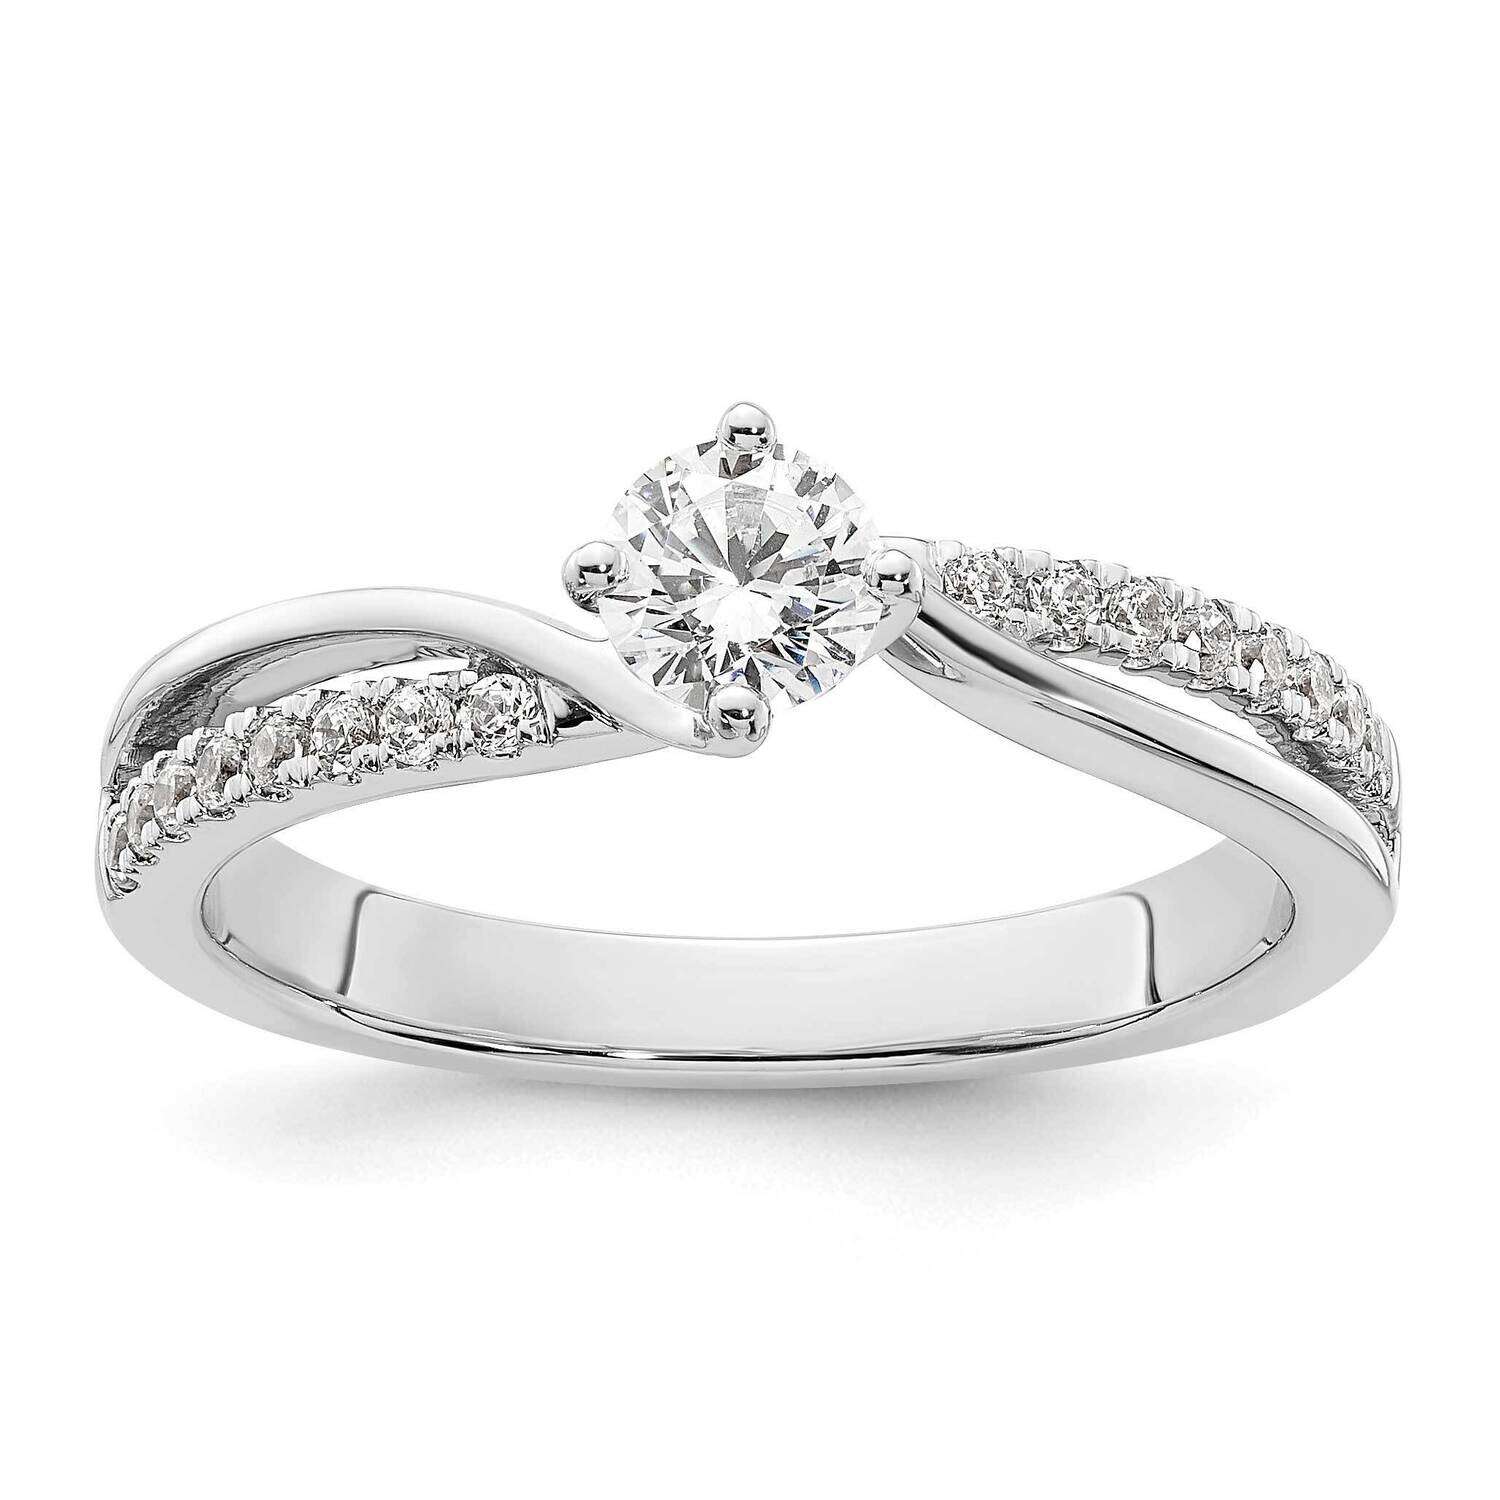 By-Pass Holds 1/3 Carat 4.5mm Round Center 1/6 Carat Diamond Semi-Mount Engagement Ring 14k White Gold RM2433E-033-WAA